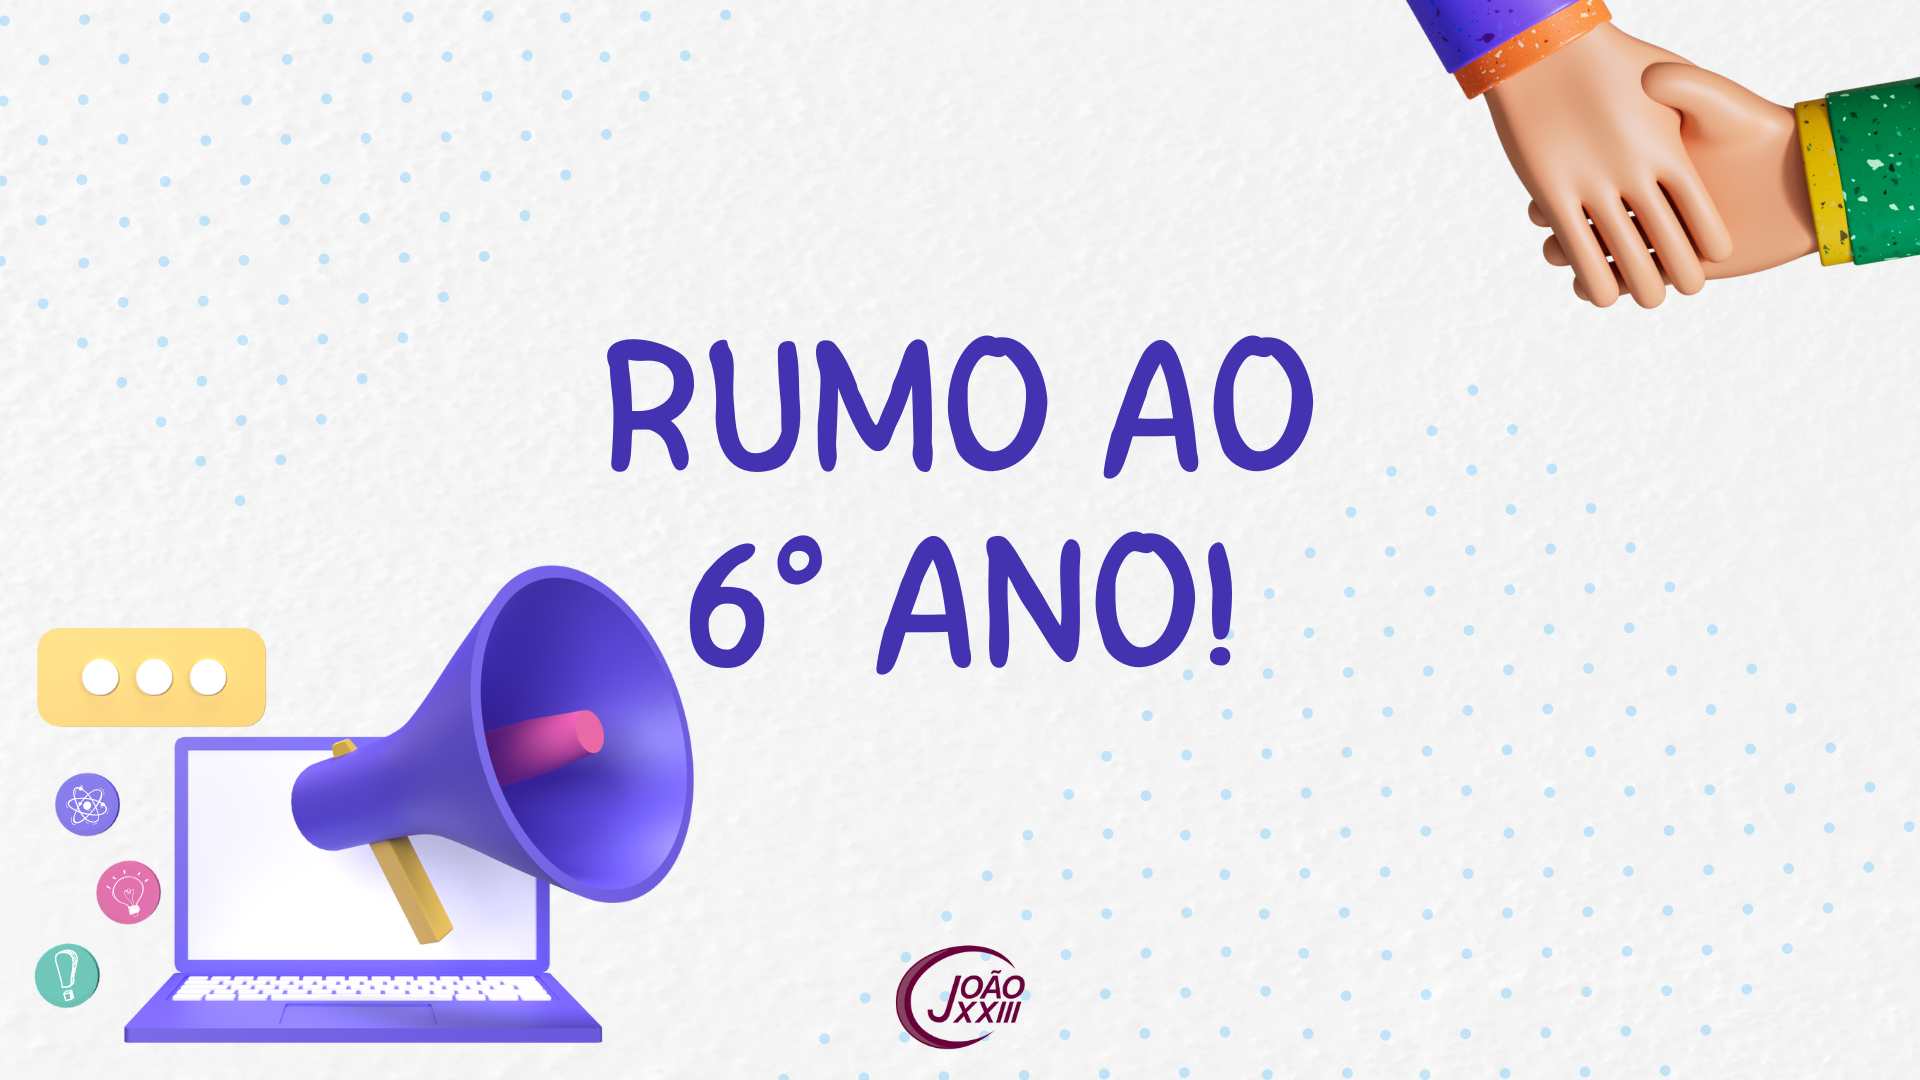 You are currently viewing Rumo ao 6° ano